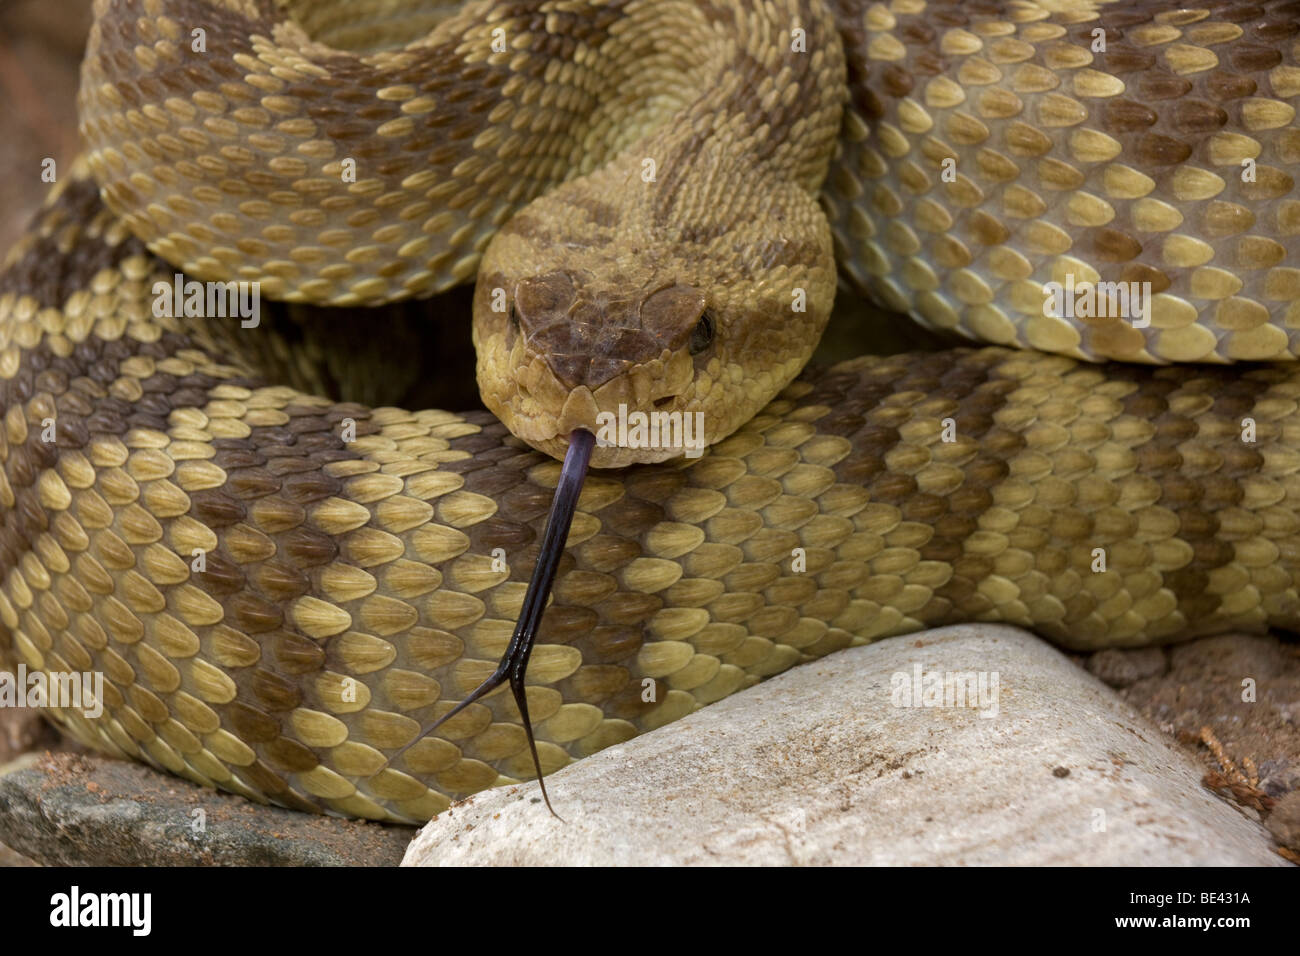 Black-tailed Rattlesnake (Crotalus molossus) - Chiricahua Mountains -Arizona - 'Smelling' or 'tasting' the air with its tongue Stock Photo